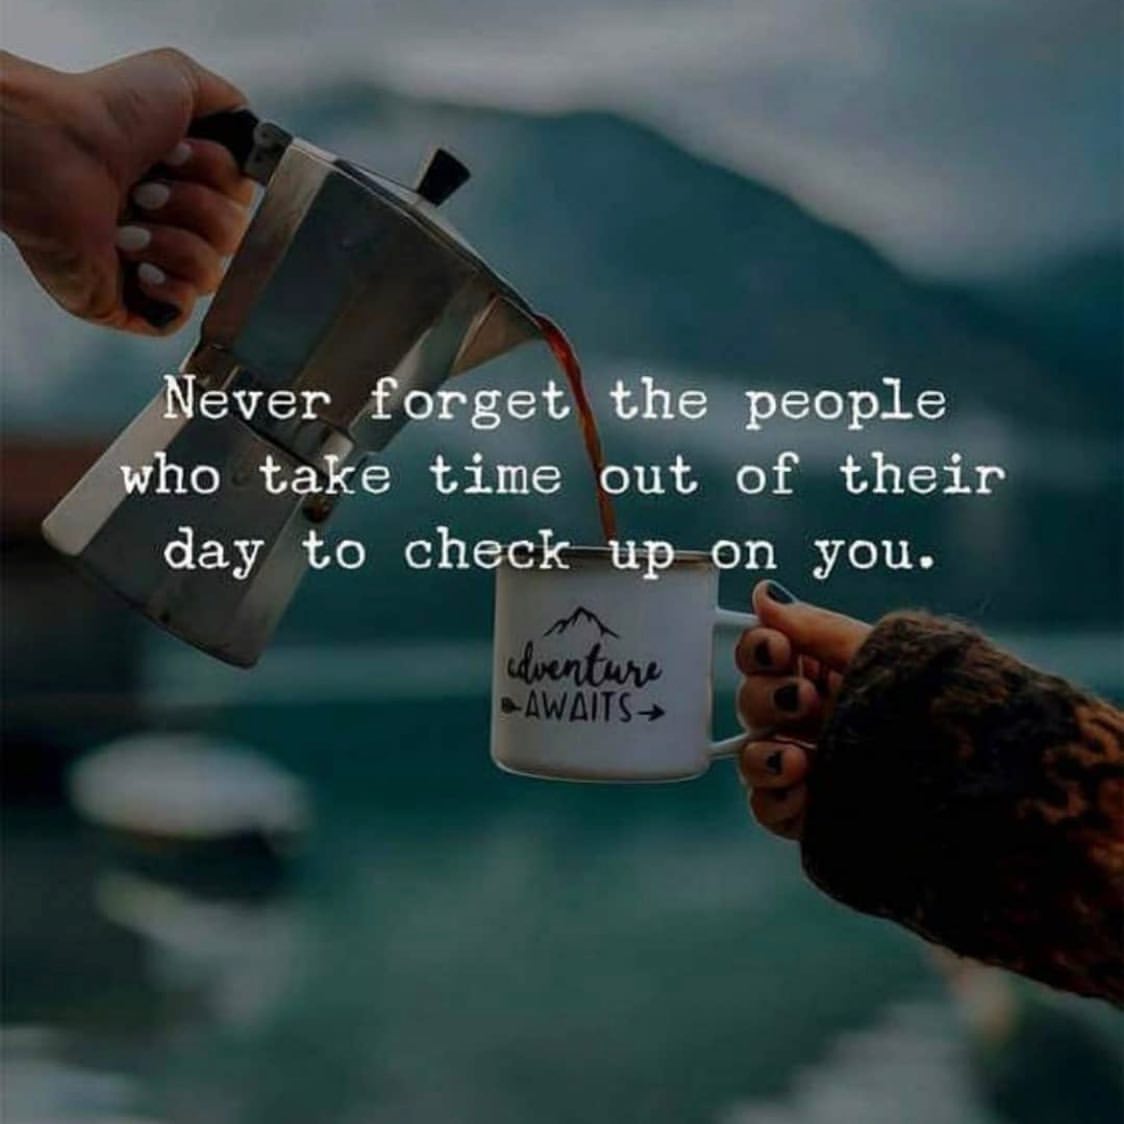 Never forget the people who take time out of their day to check up on you.